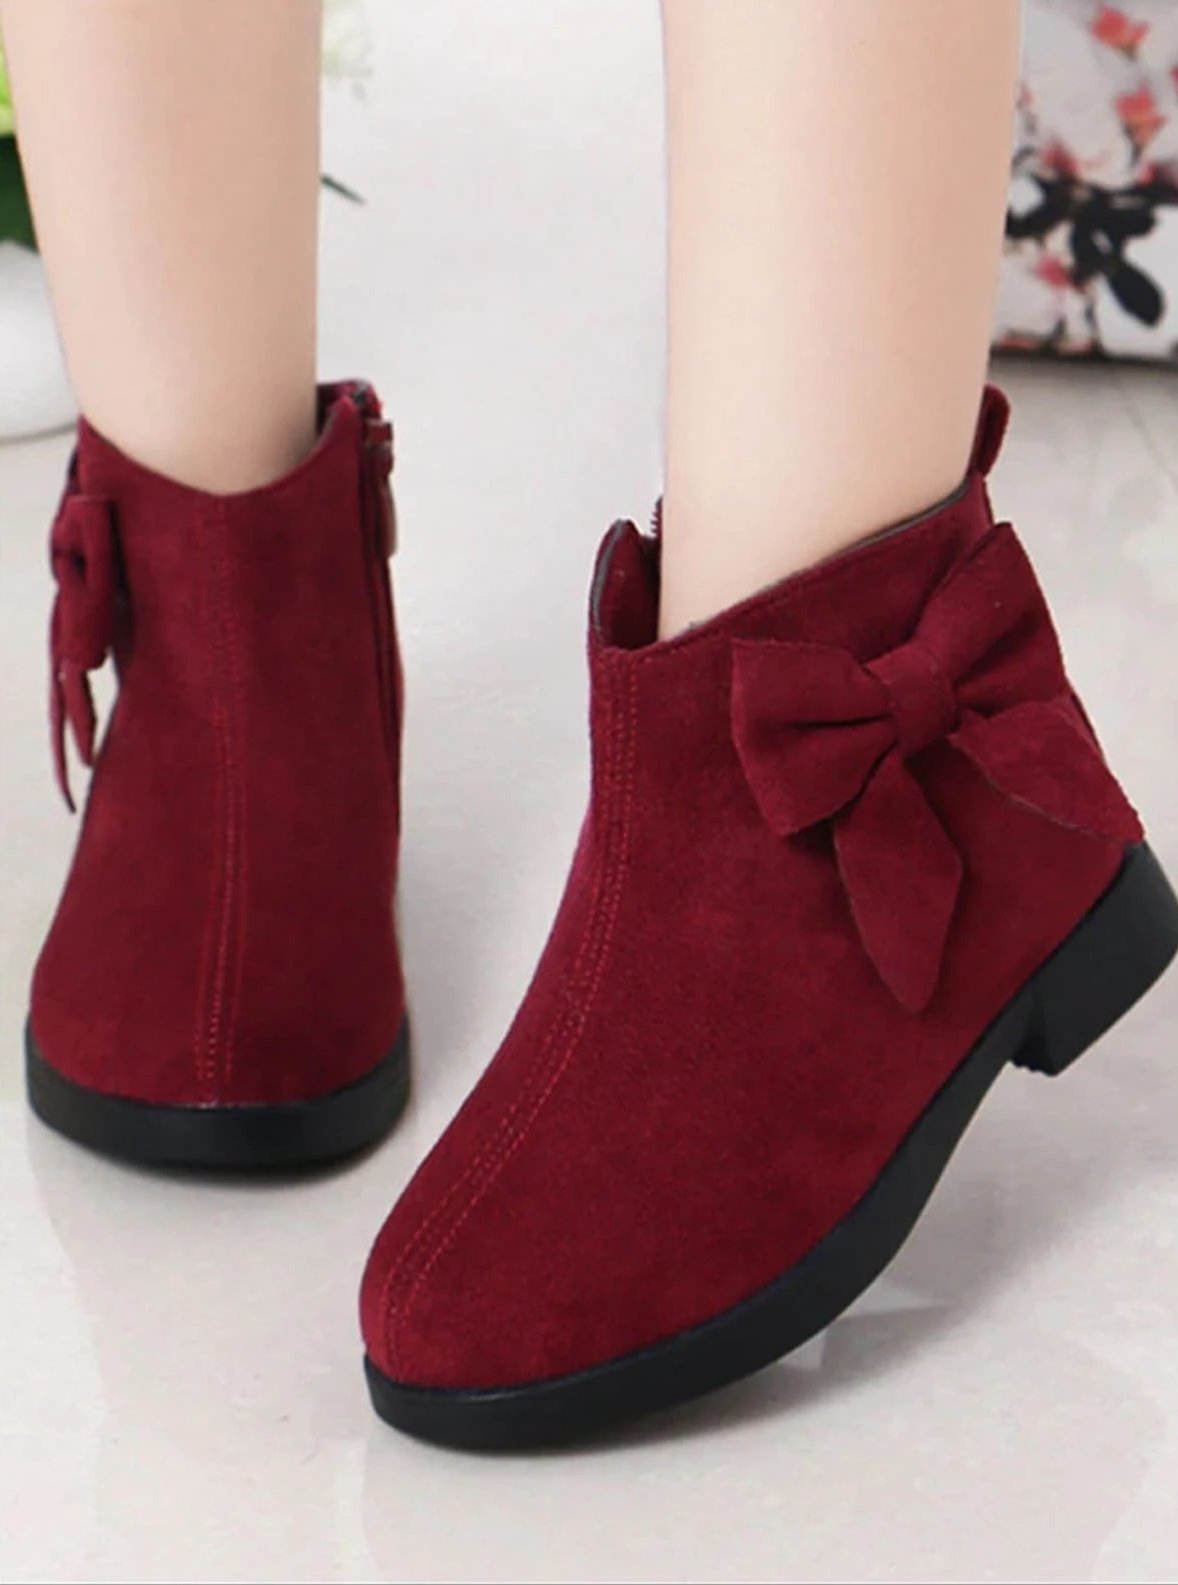 Girls Suede Bow Side Ankle Booties - Red / 1 - Girls Boots